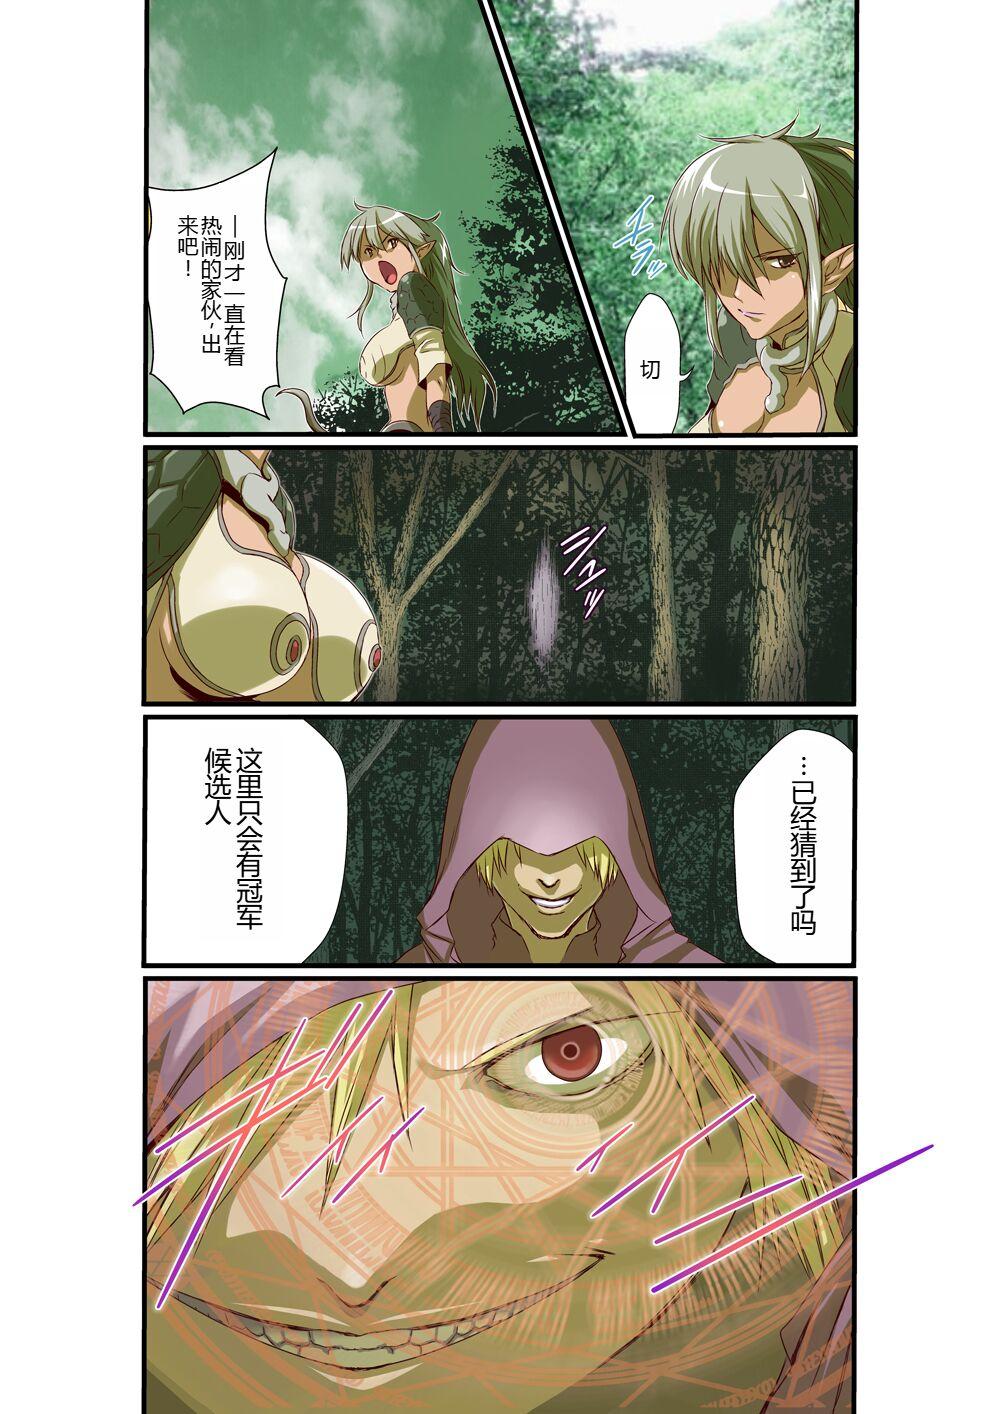 Fucking Queen's *lade Mind-control Manga - Queens blade Boquete - Page 10